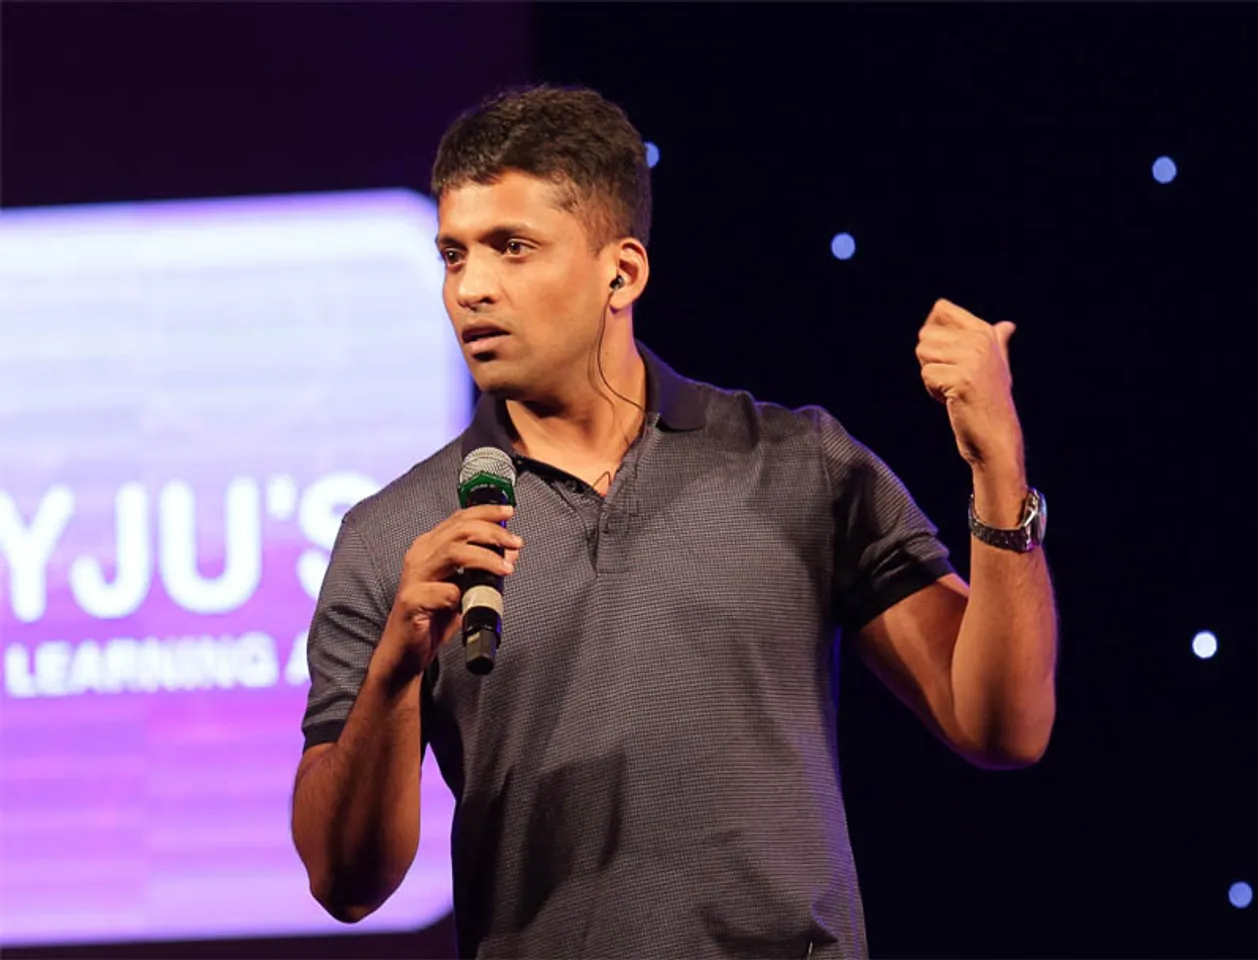 Edtech major Byju's makes another acquisition, this time Gradeup